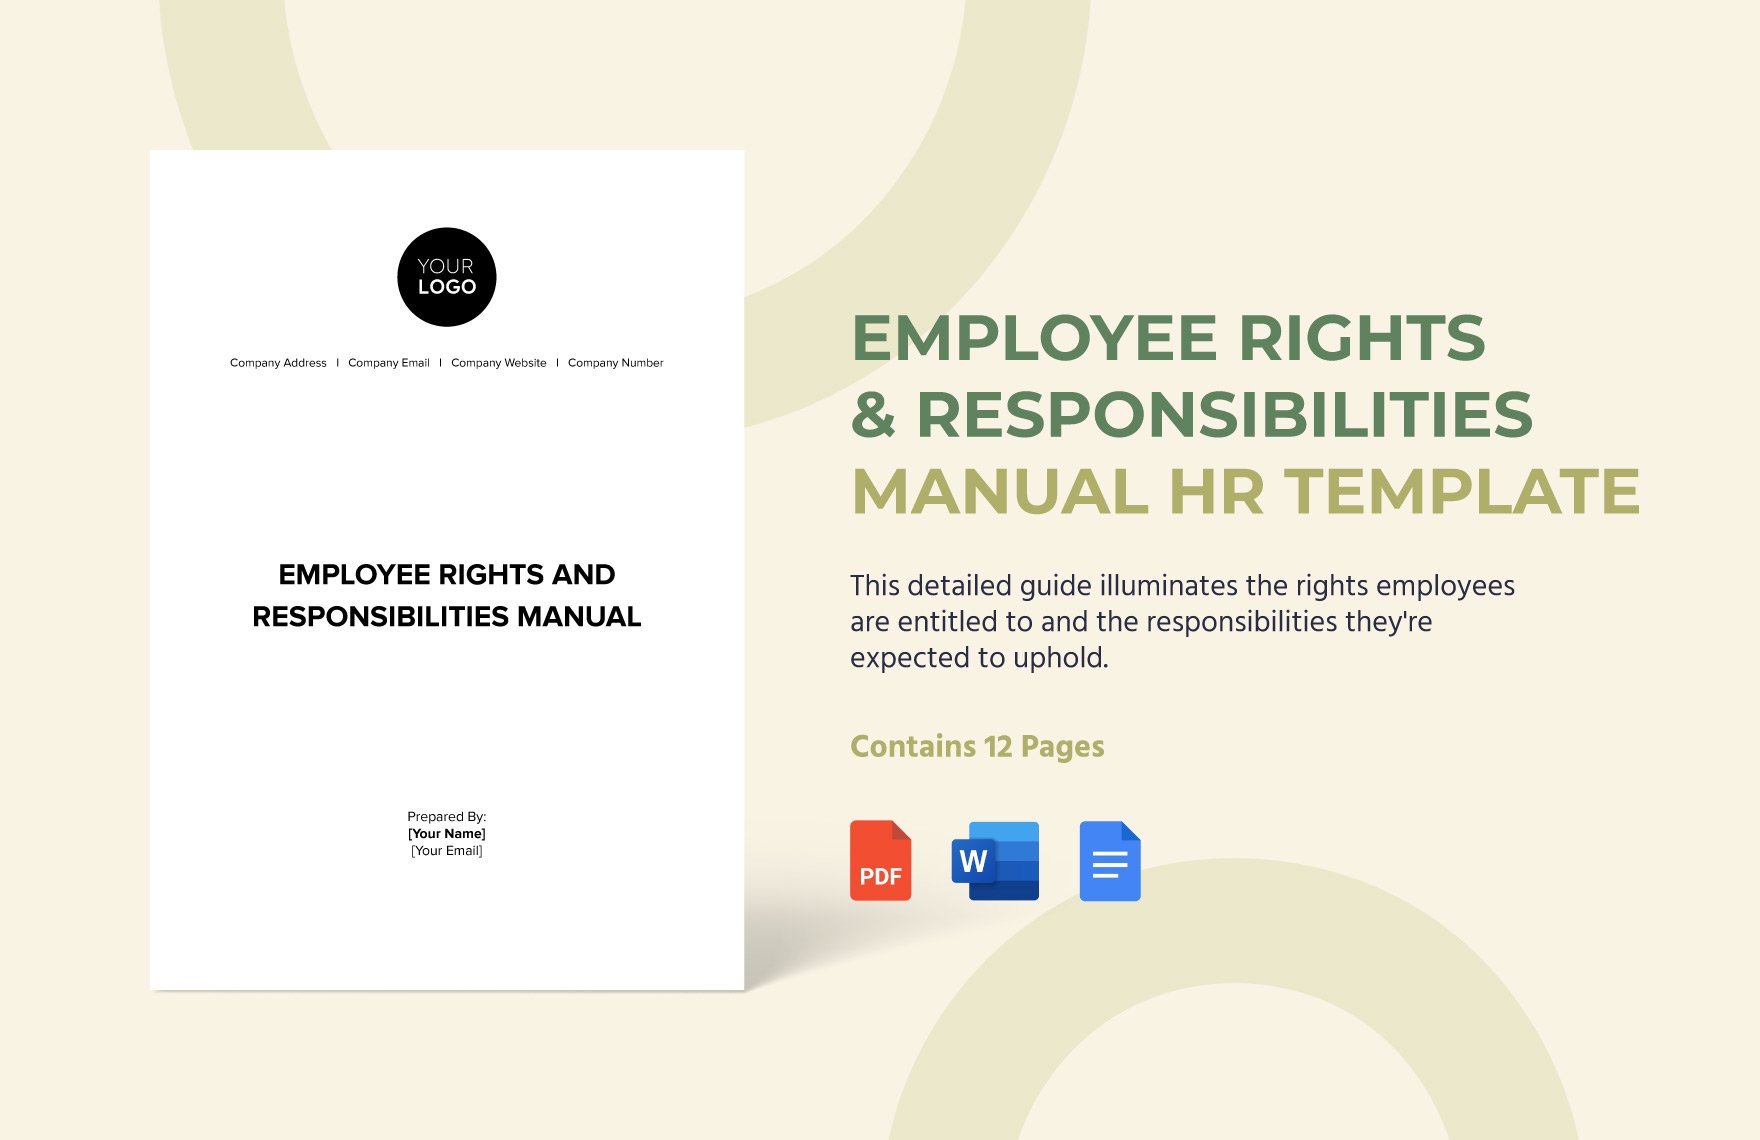 Employee Rights & Responsibilities Manual HR Template in Word, Google Docs, PDF